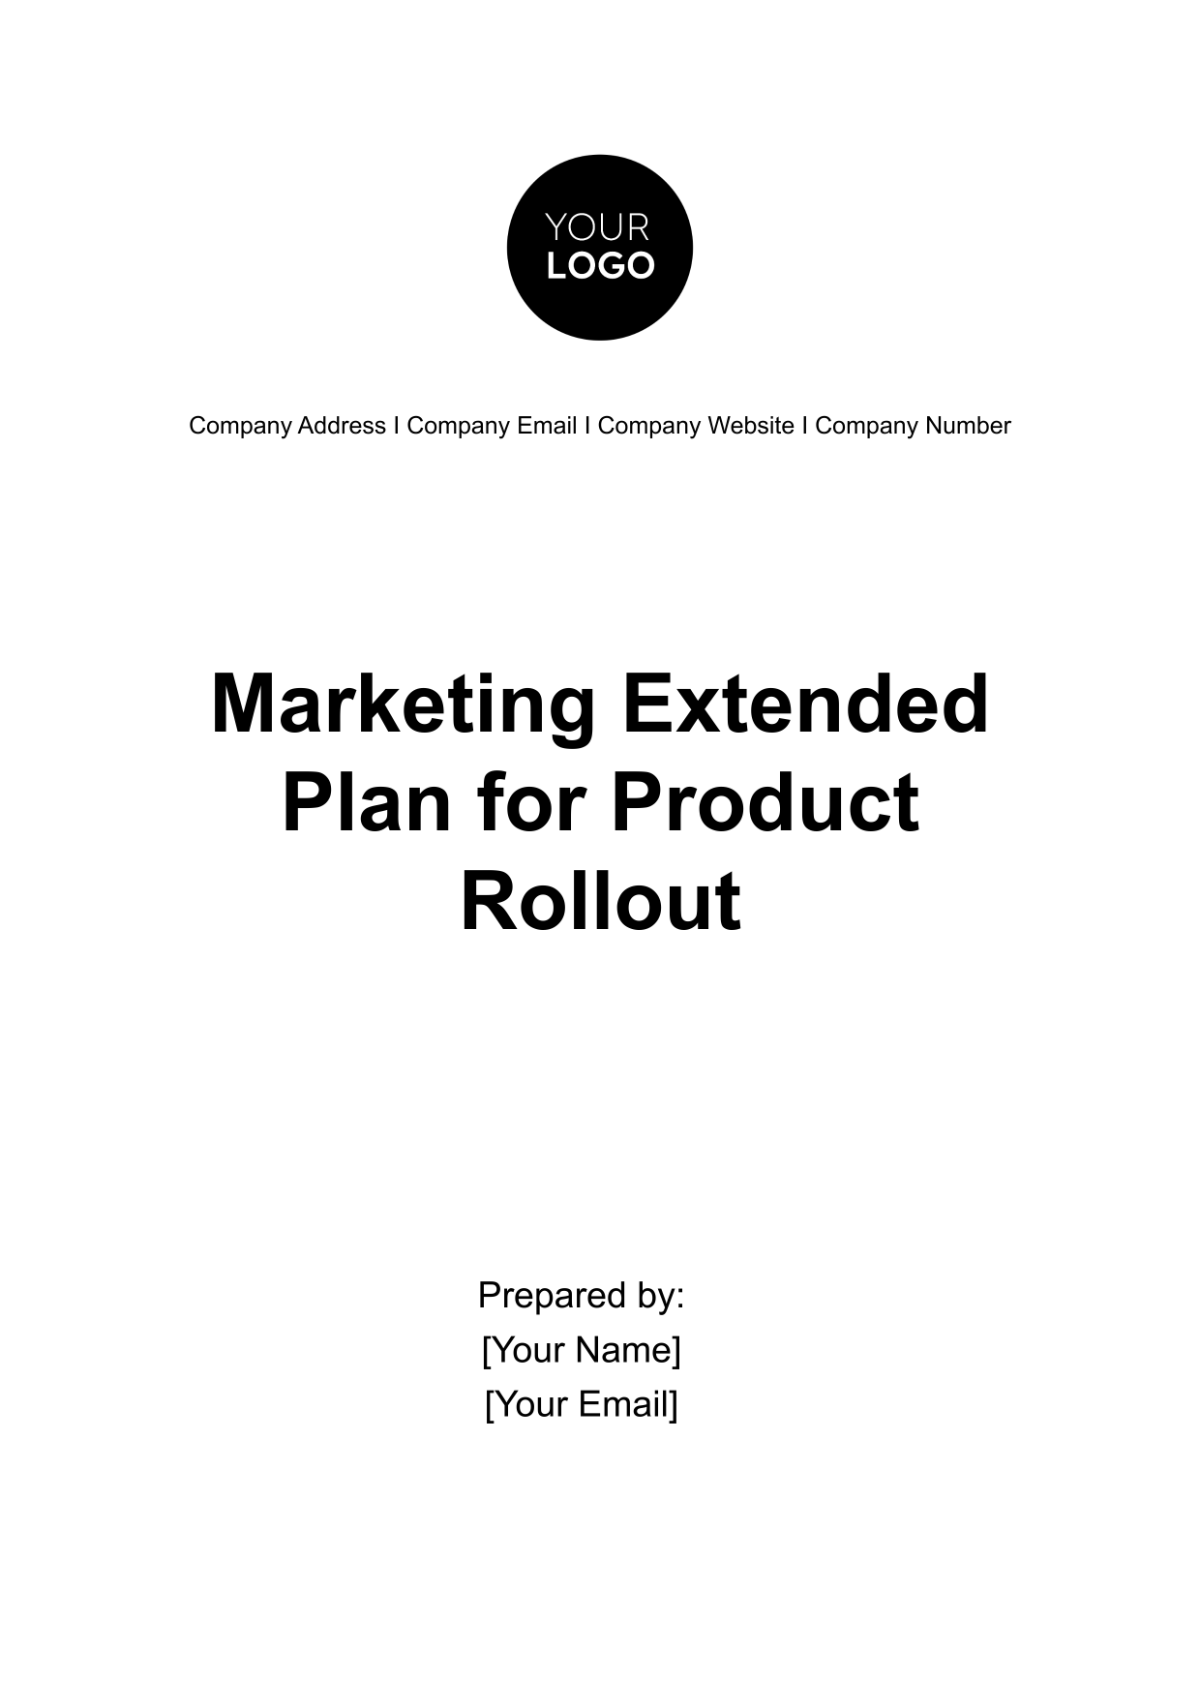 Free Marketing Extended Plan for Product Rollout Template